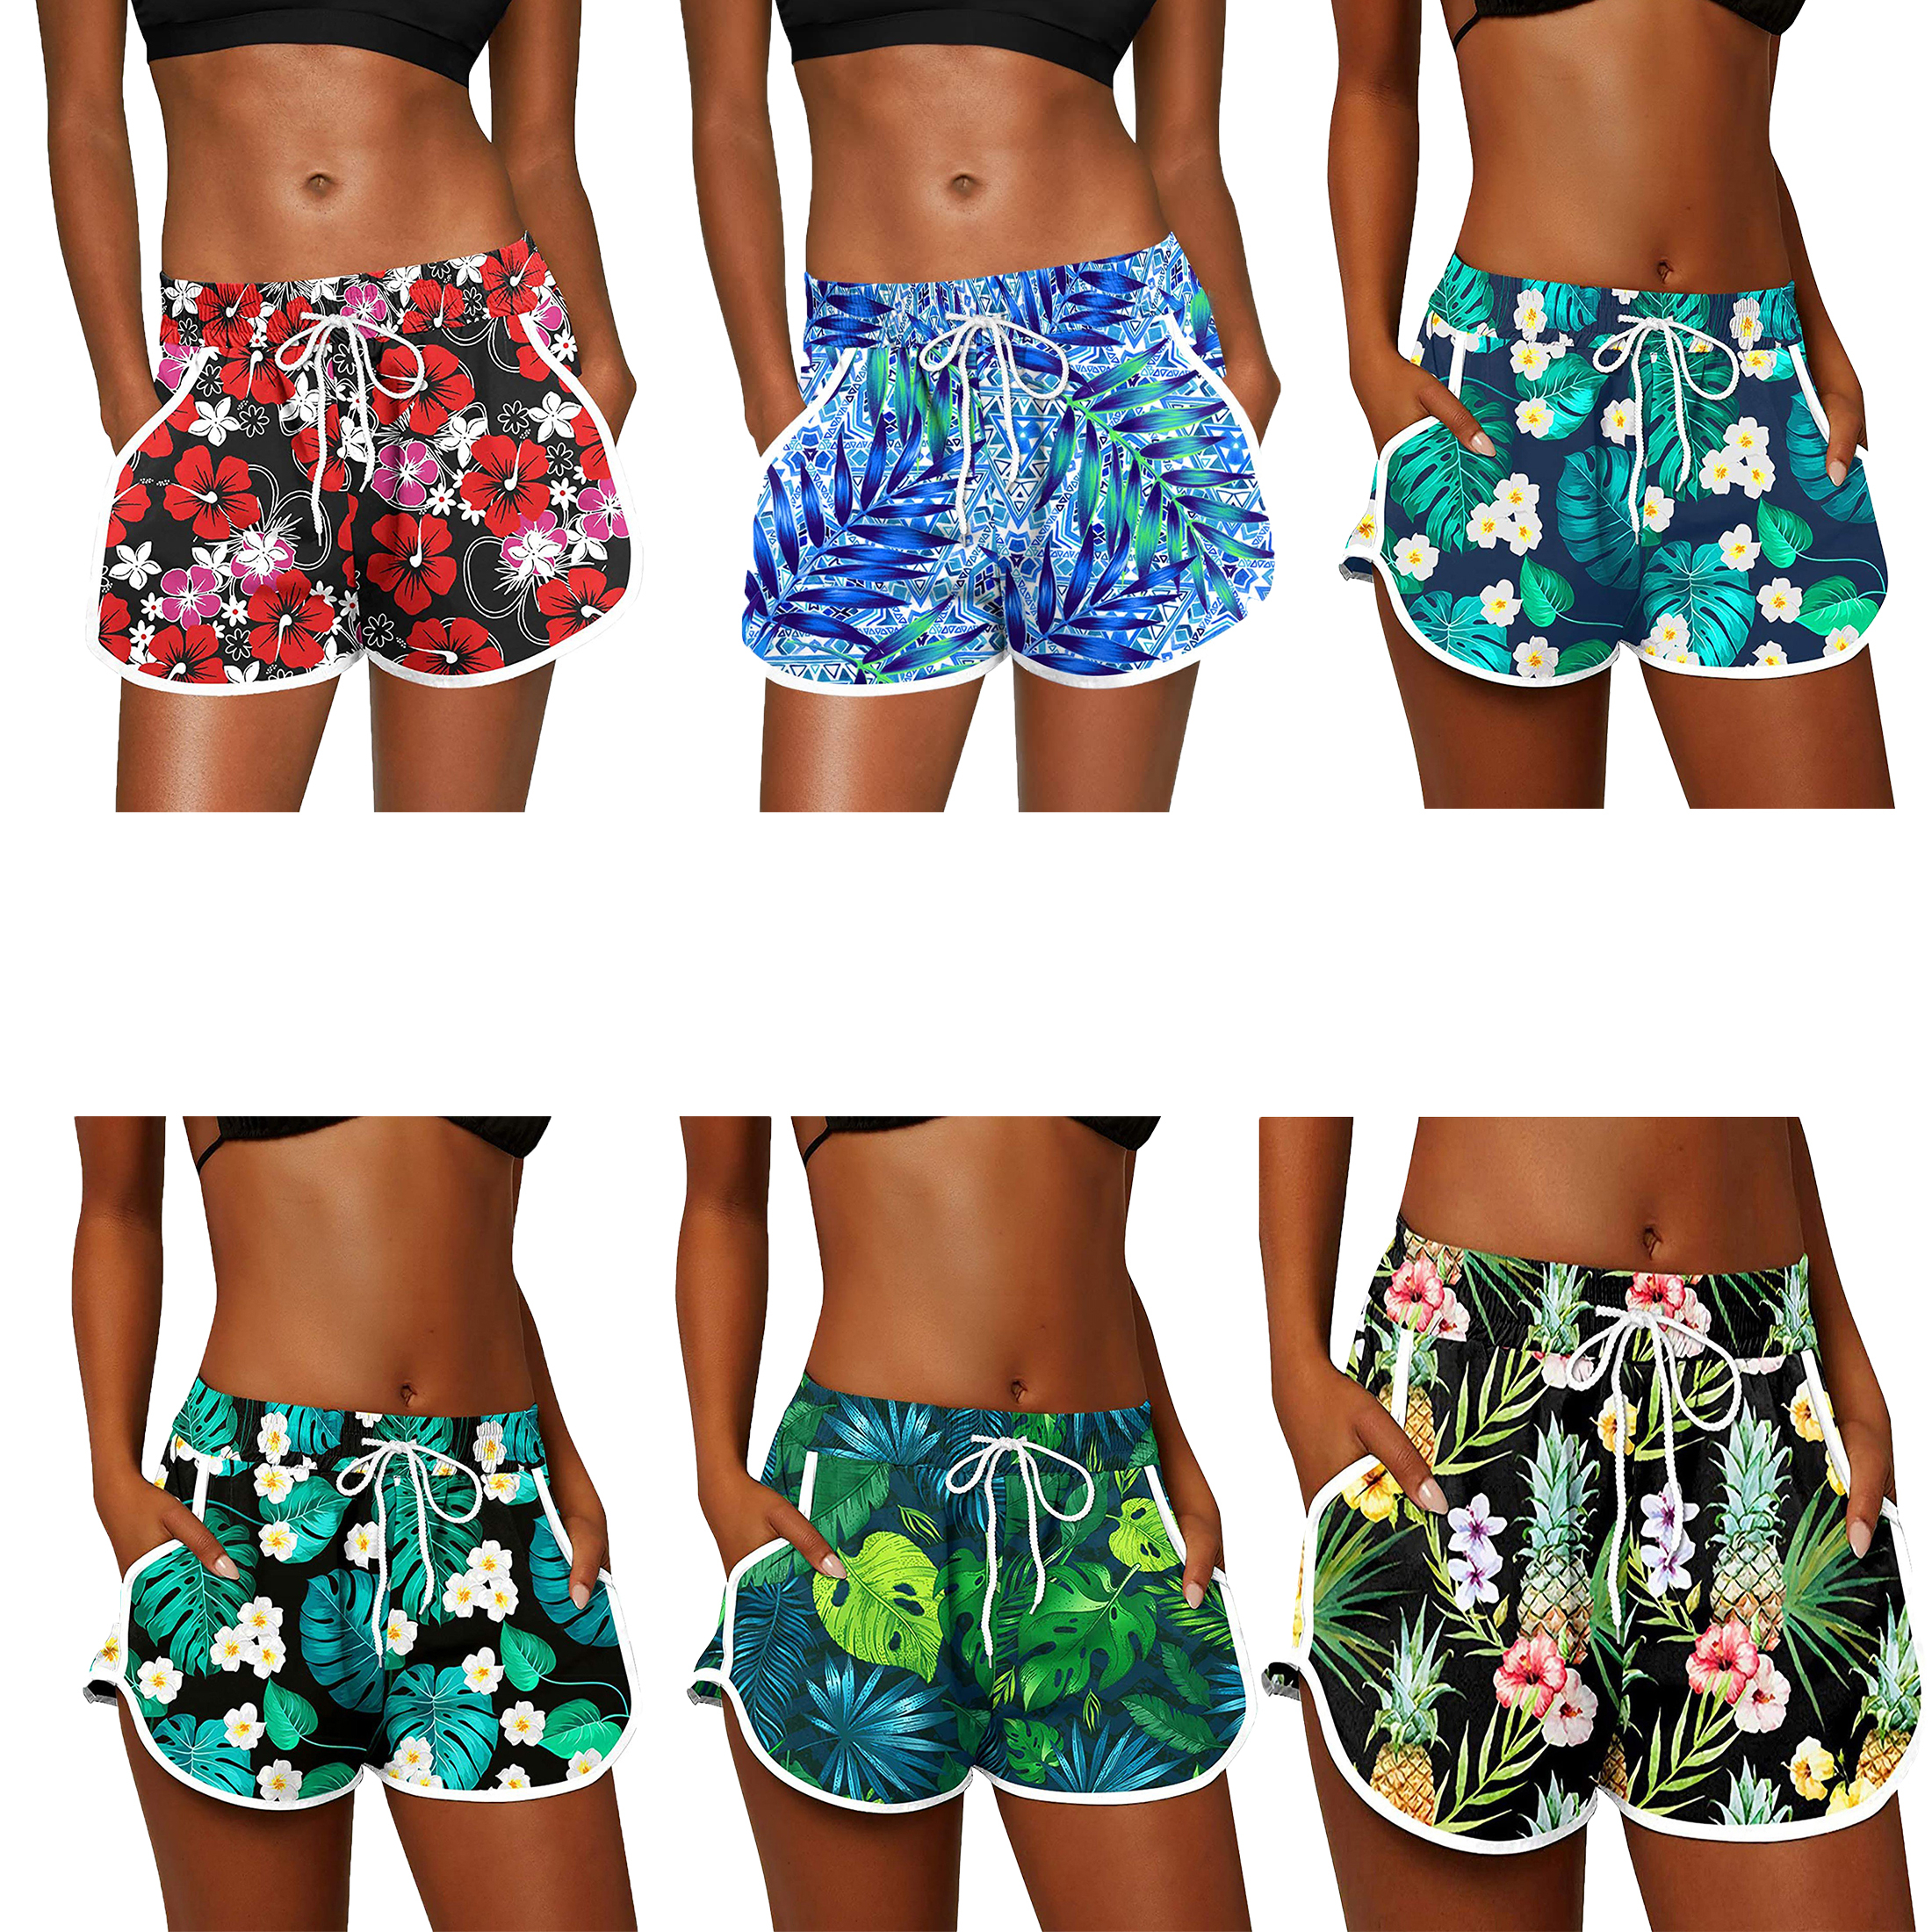 2-Pack Women's Floral Printed Shorts Elastic Waist Drawstring Summer Lounge Wear Pants Casual Dolphin Shorts With Pockets Quick Dry - L